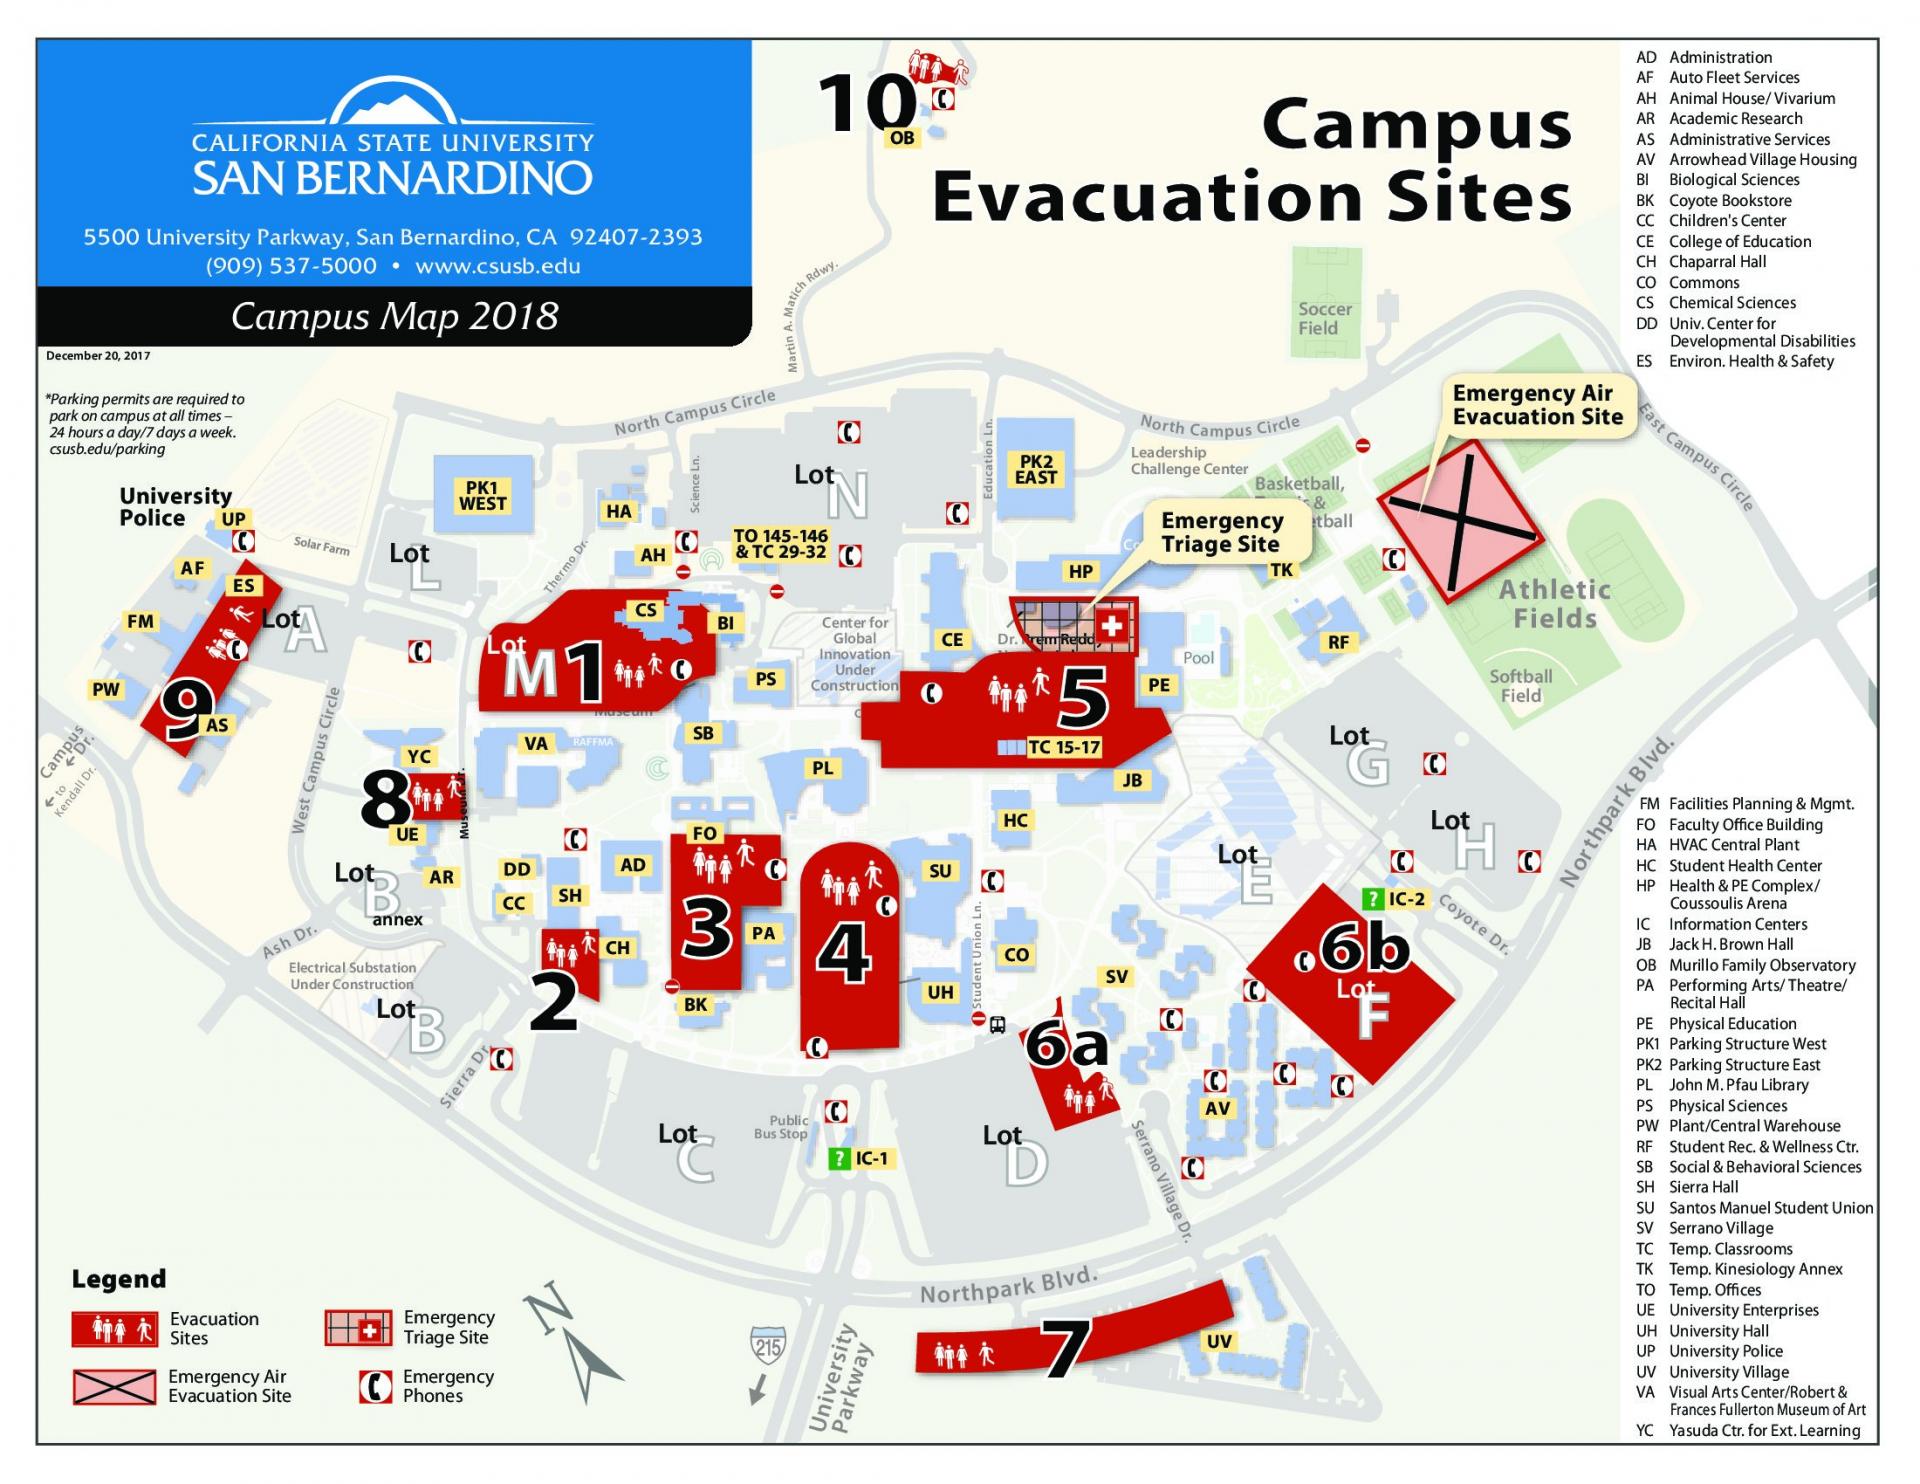 Cal State San Bernardino Campus Map Evacuation Sites | Emergency Management and Business Continuity 